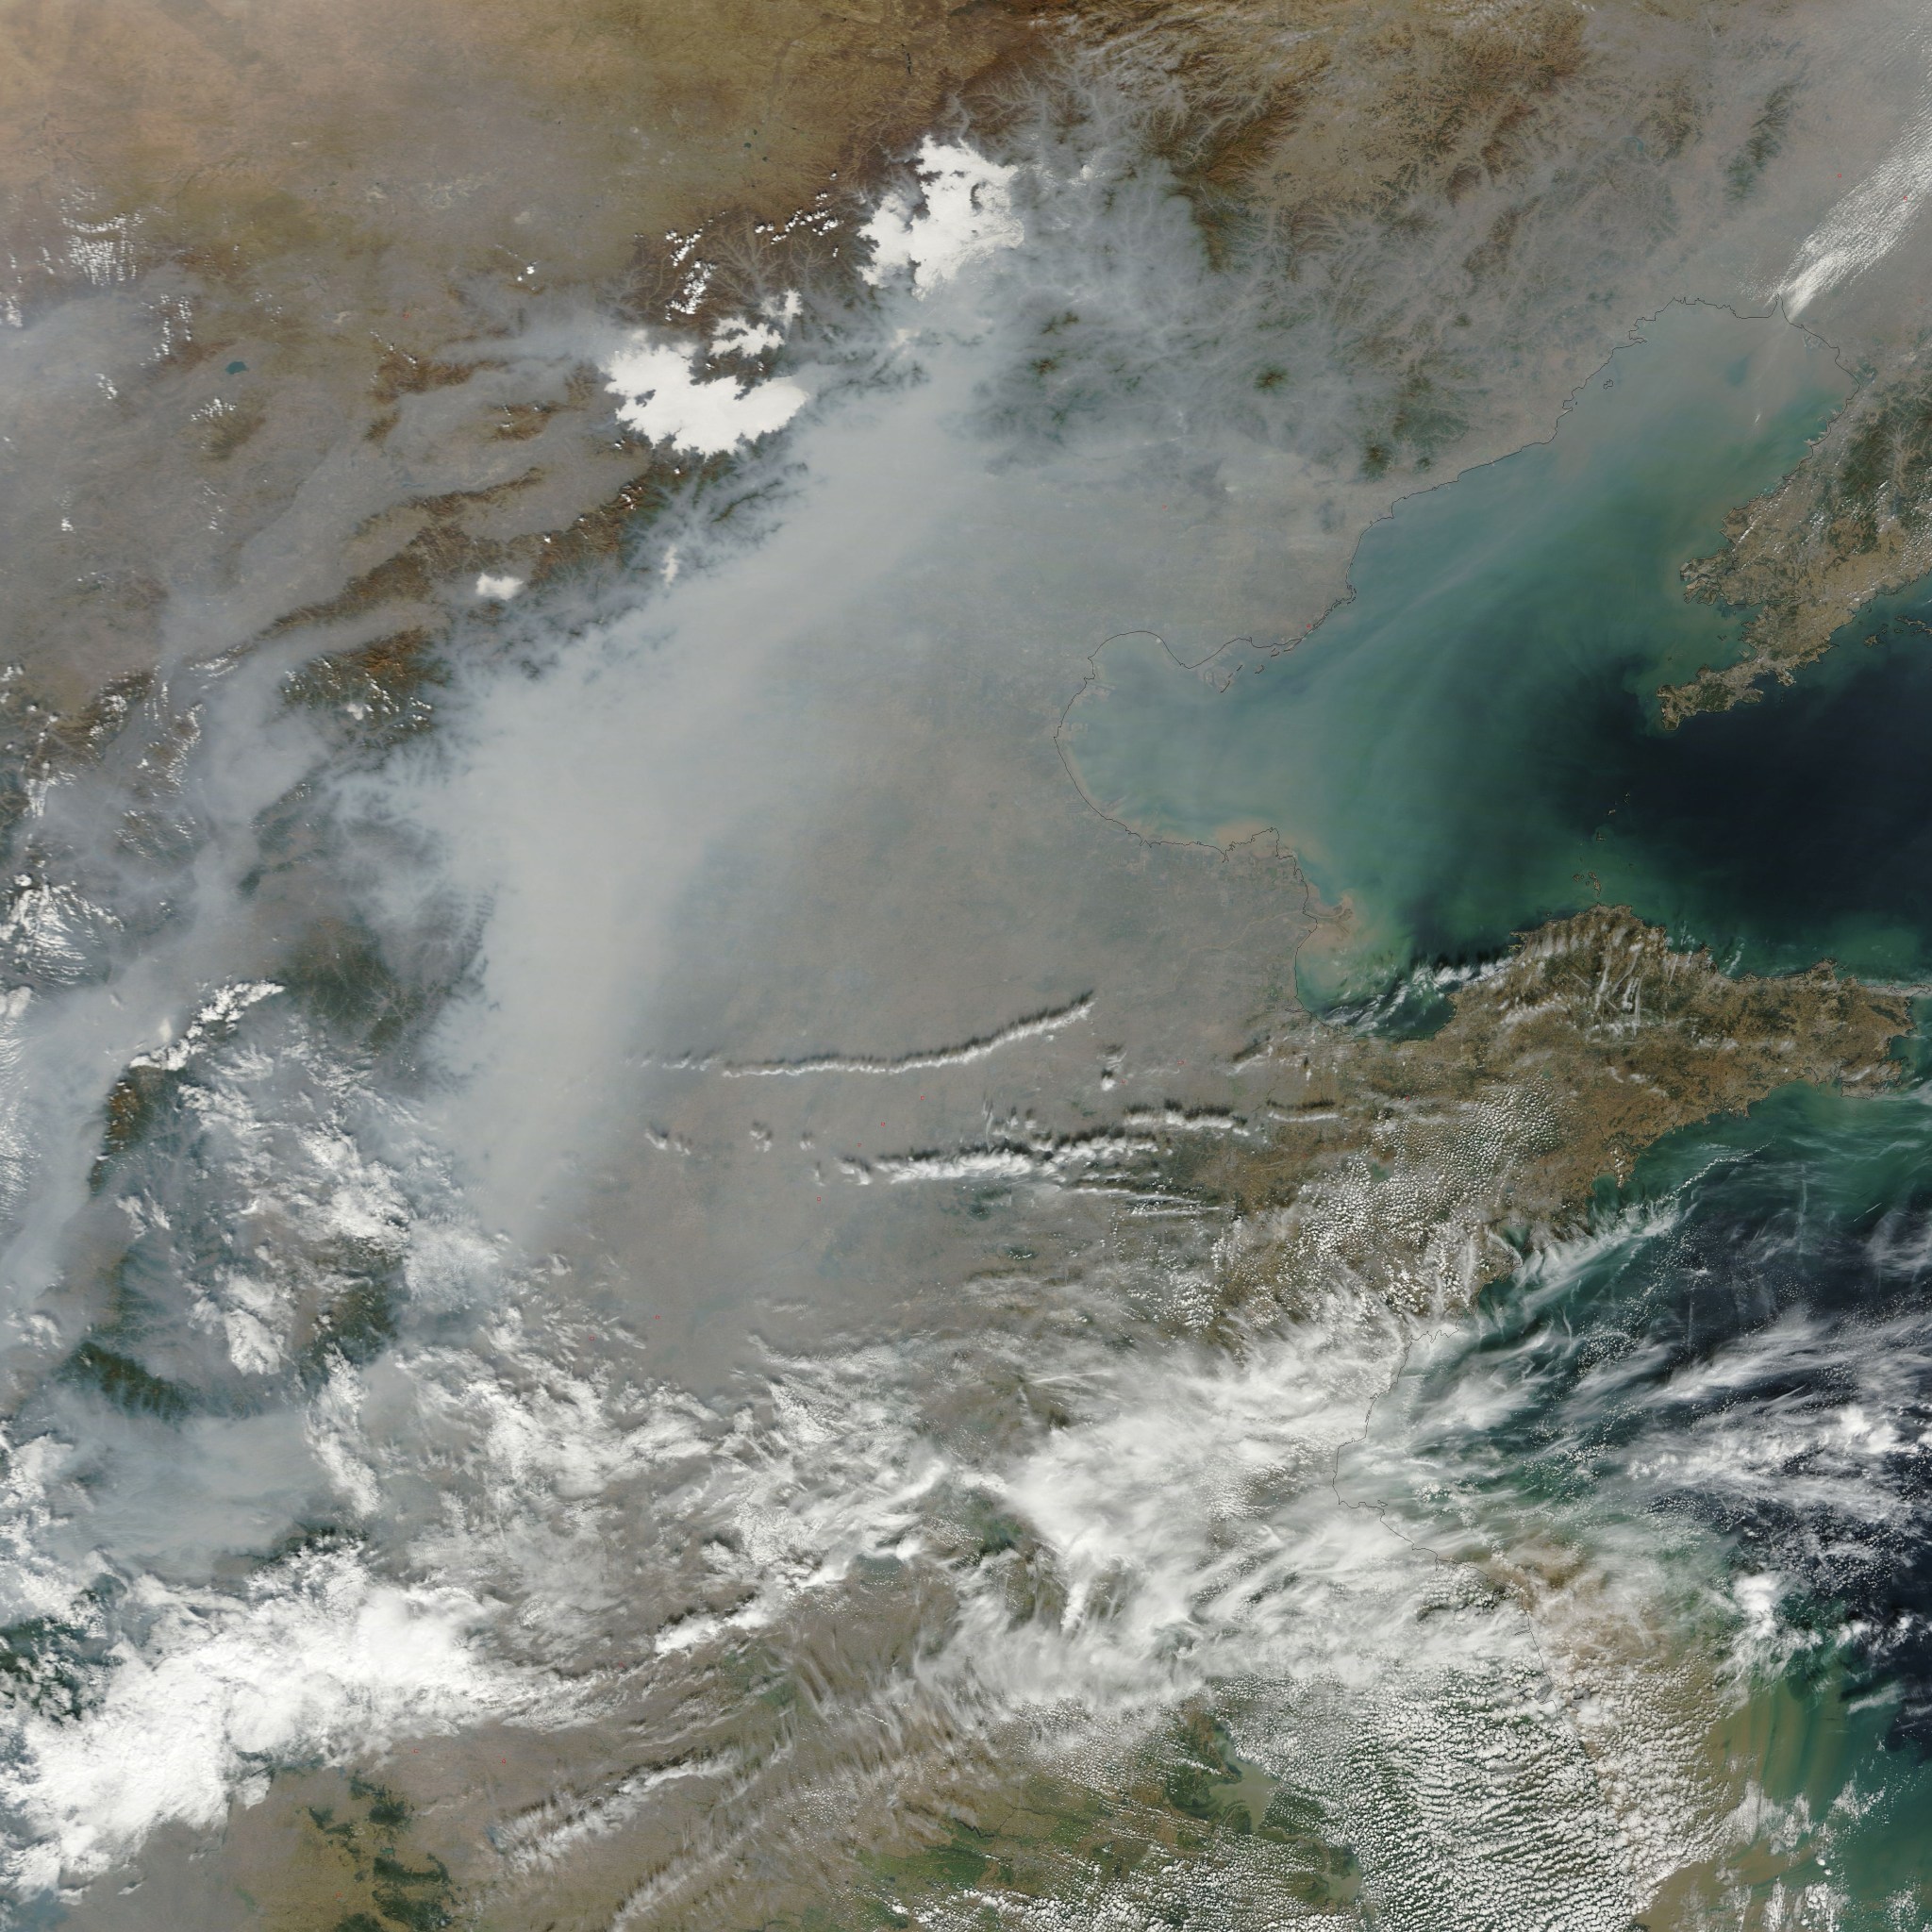 A haze covering Eastern China captured by the Moderate Resolution Imaging Spectroradiometer (MODIS) on NASA’s Terra satellite. On the day the image was captured, ground-based measurements reported PM 2.5 measurements of 334 micrograms per cubic meter of air.